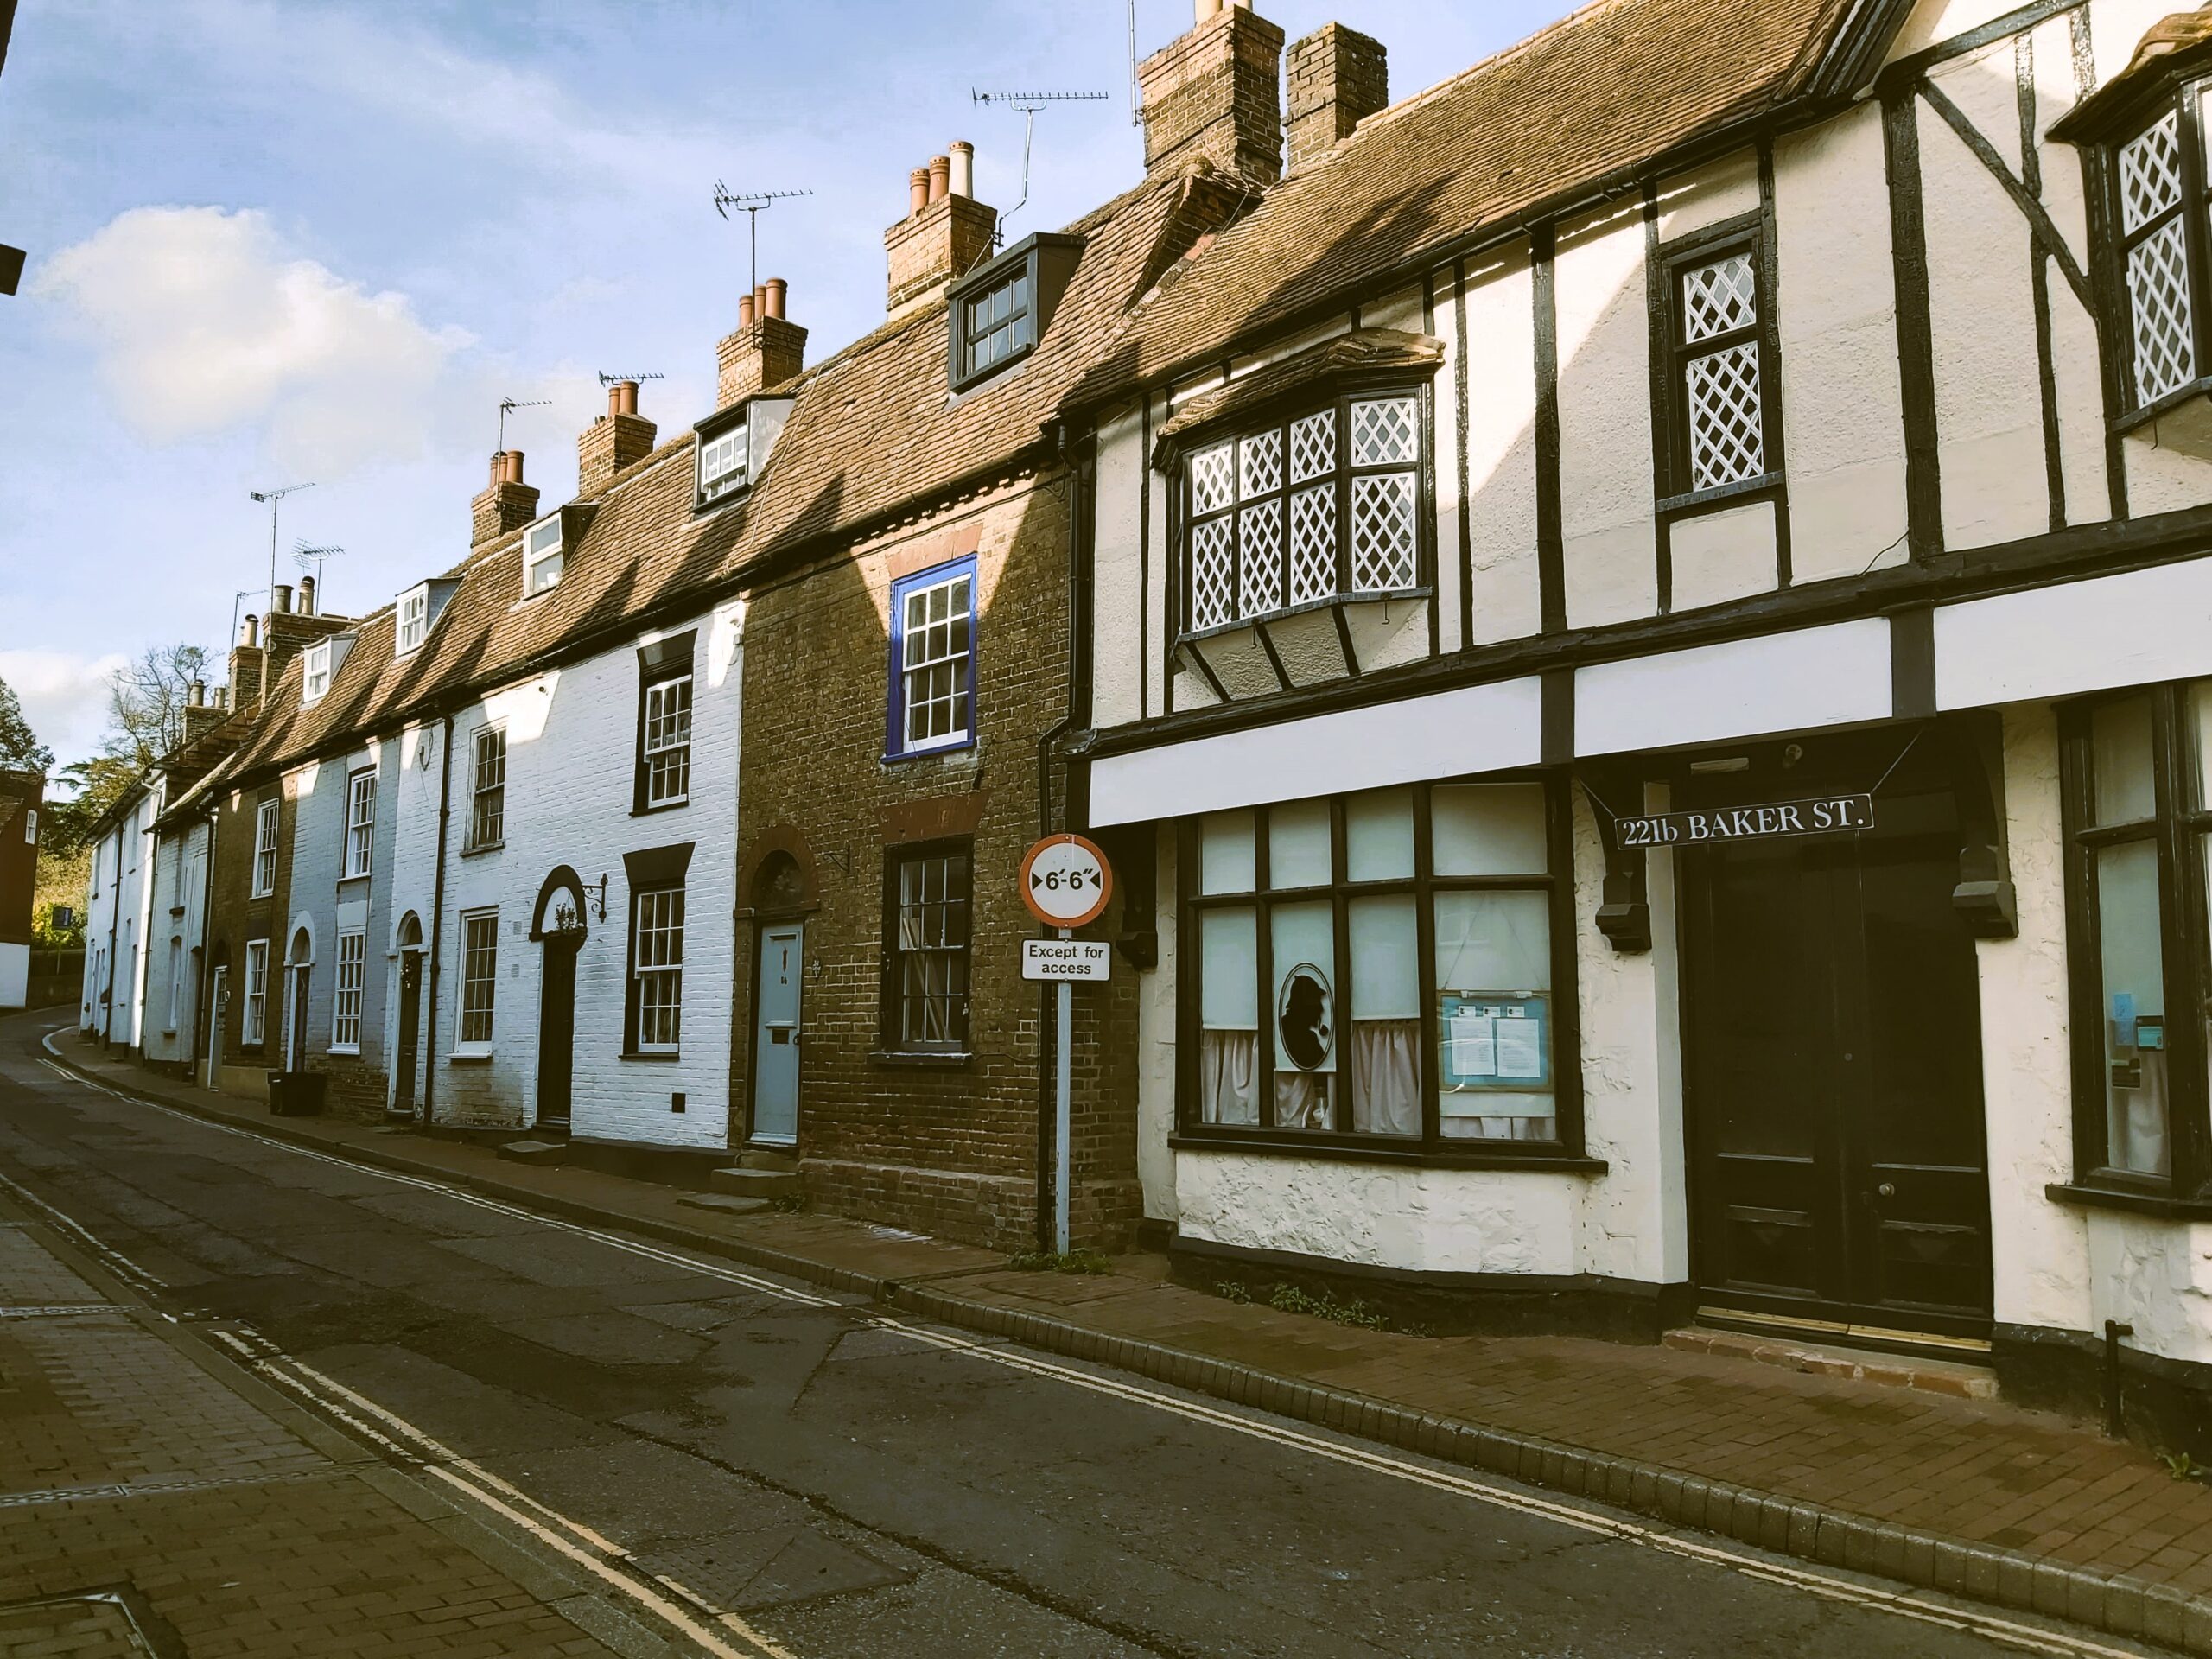 Old houses, a street view at Aylesford, Kent, England.